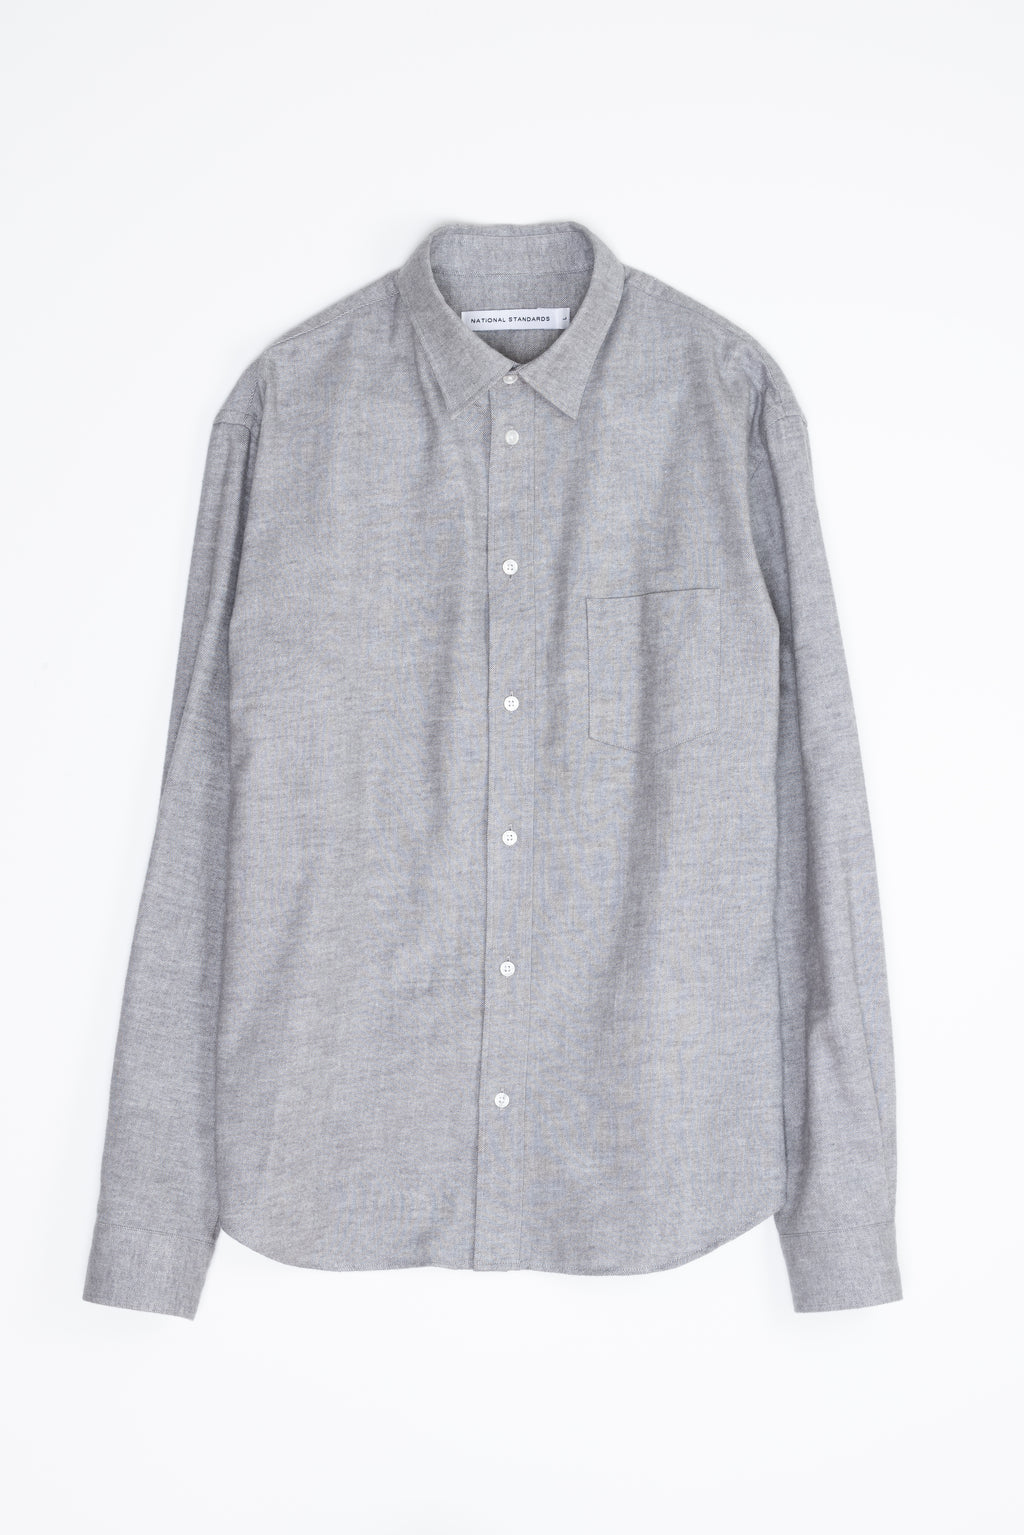 Japanese Nep Twill in Grey 01